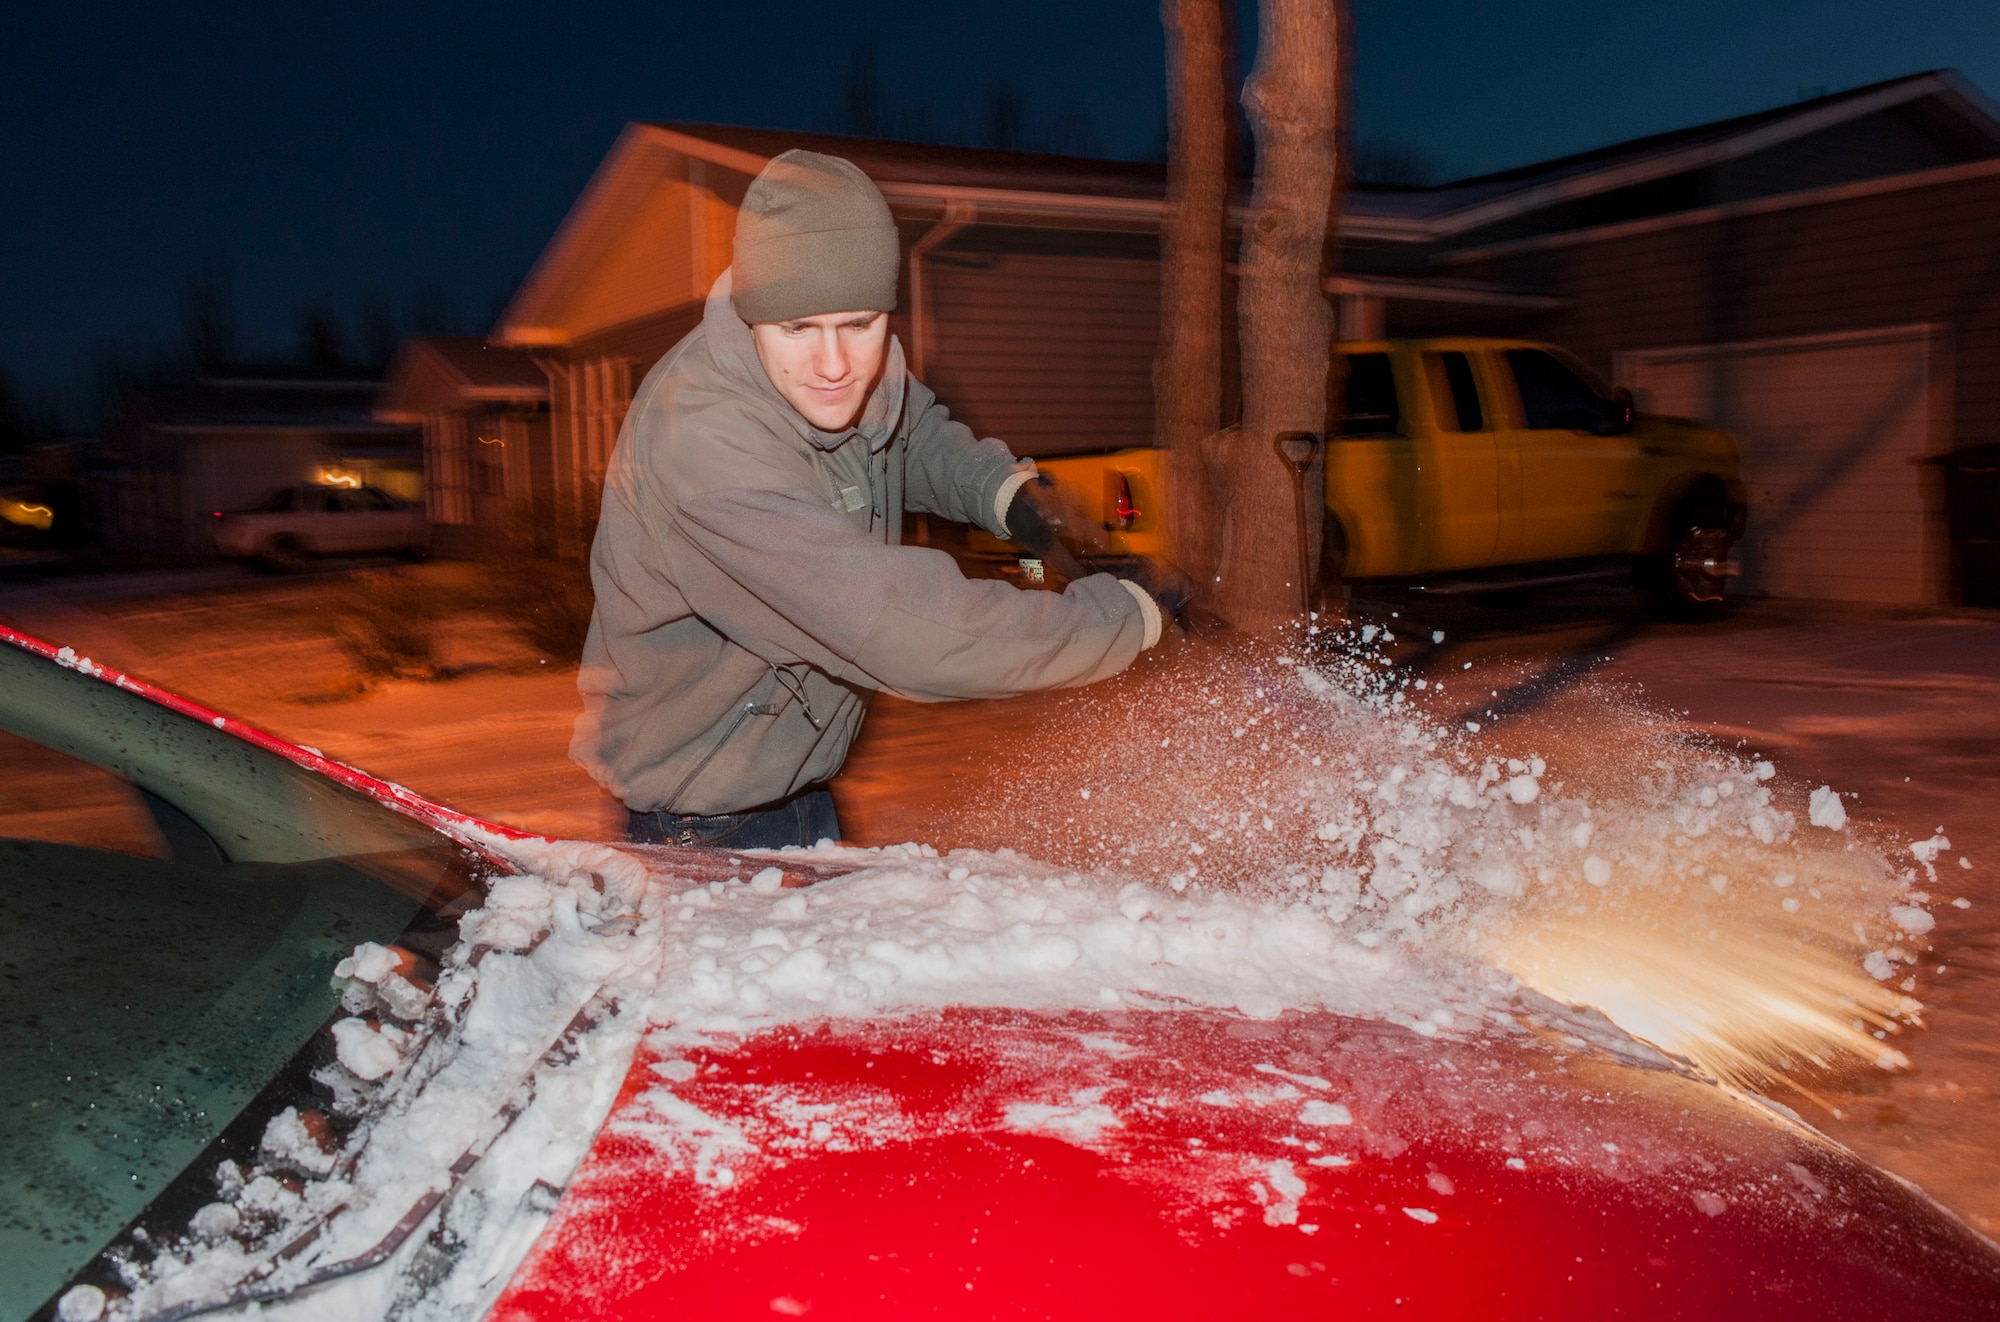 Senior Airman Thomas Stang, 5th Security Forces Squadron installation entry controller, clears a vehicles windshield before driving on Minot Air Force Base, N.D. Nov. 13, 2014. During the winter months, it is crucial for drivers to ensure they clear all of the windows on their vehicle before driving to avoid accidents.  (U.S. Air Force photo/Senior Airman Stephanie Morris)